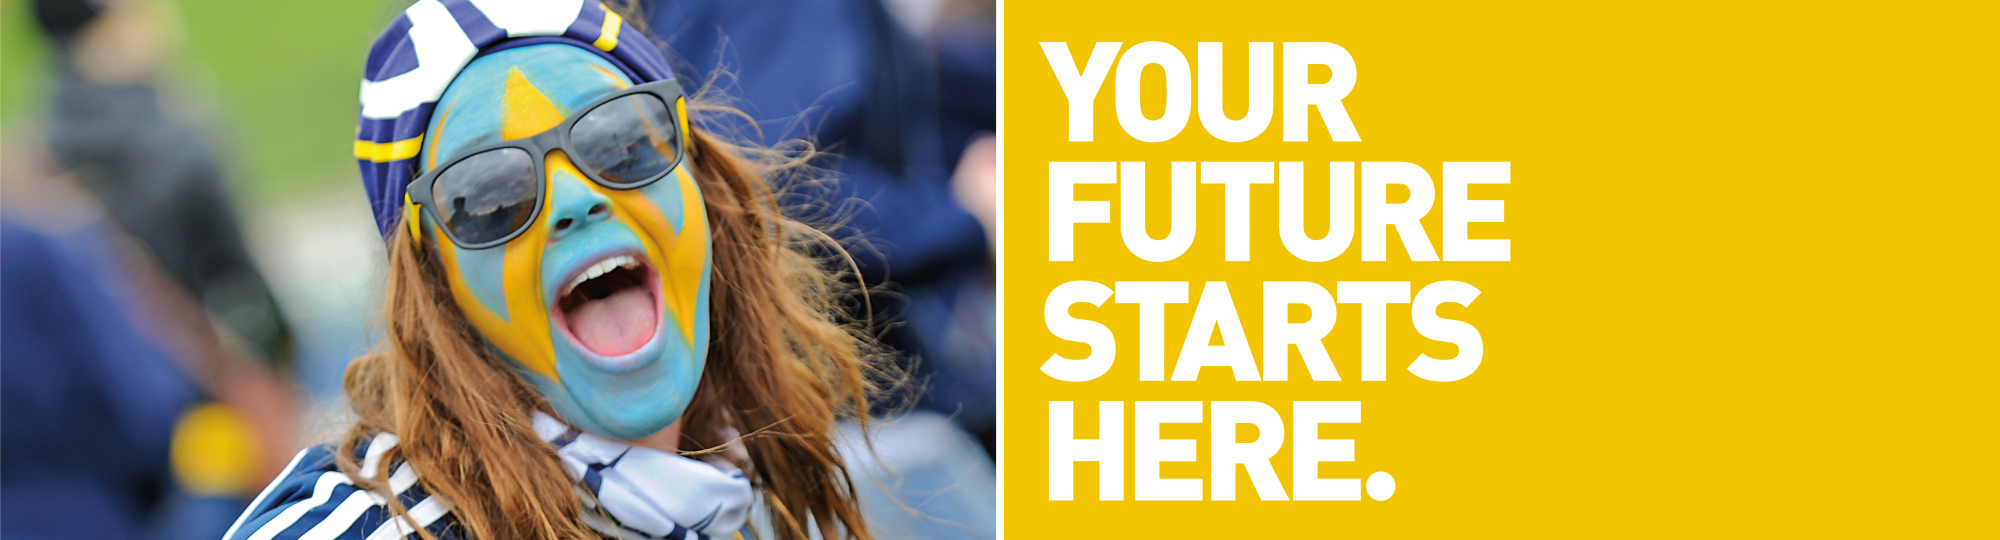 Your future starts here.